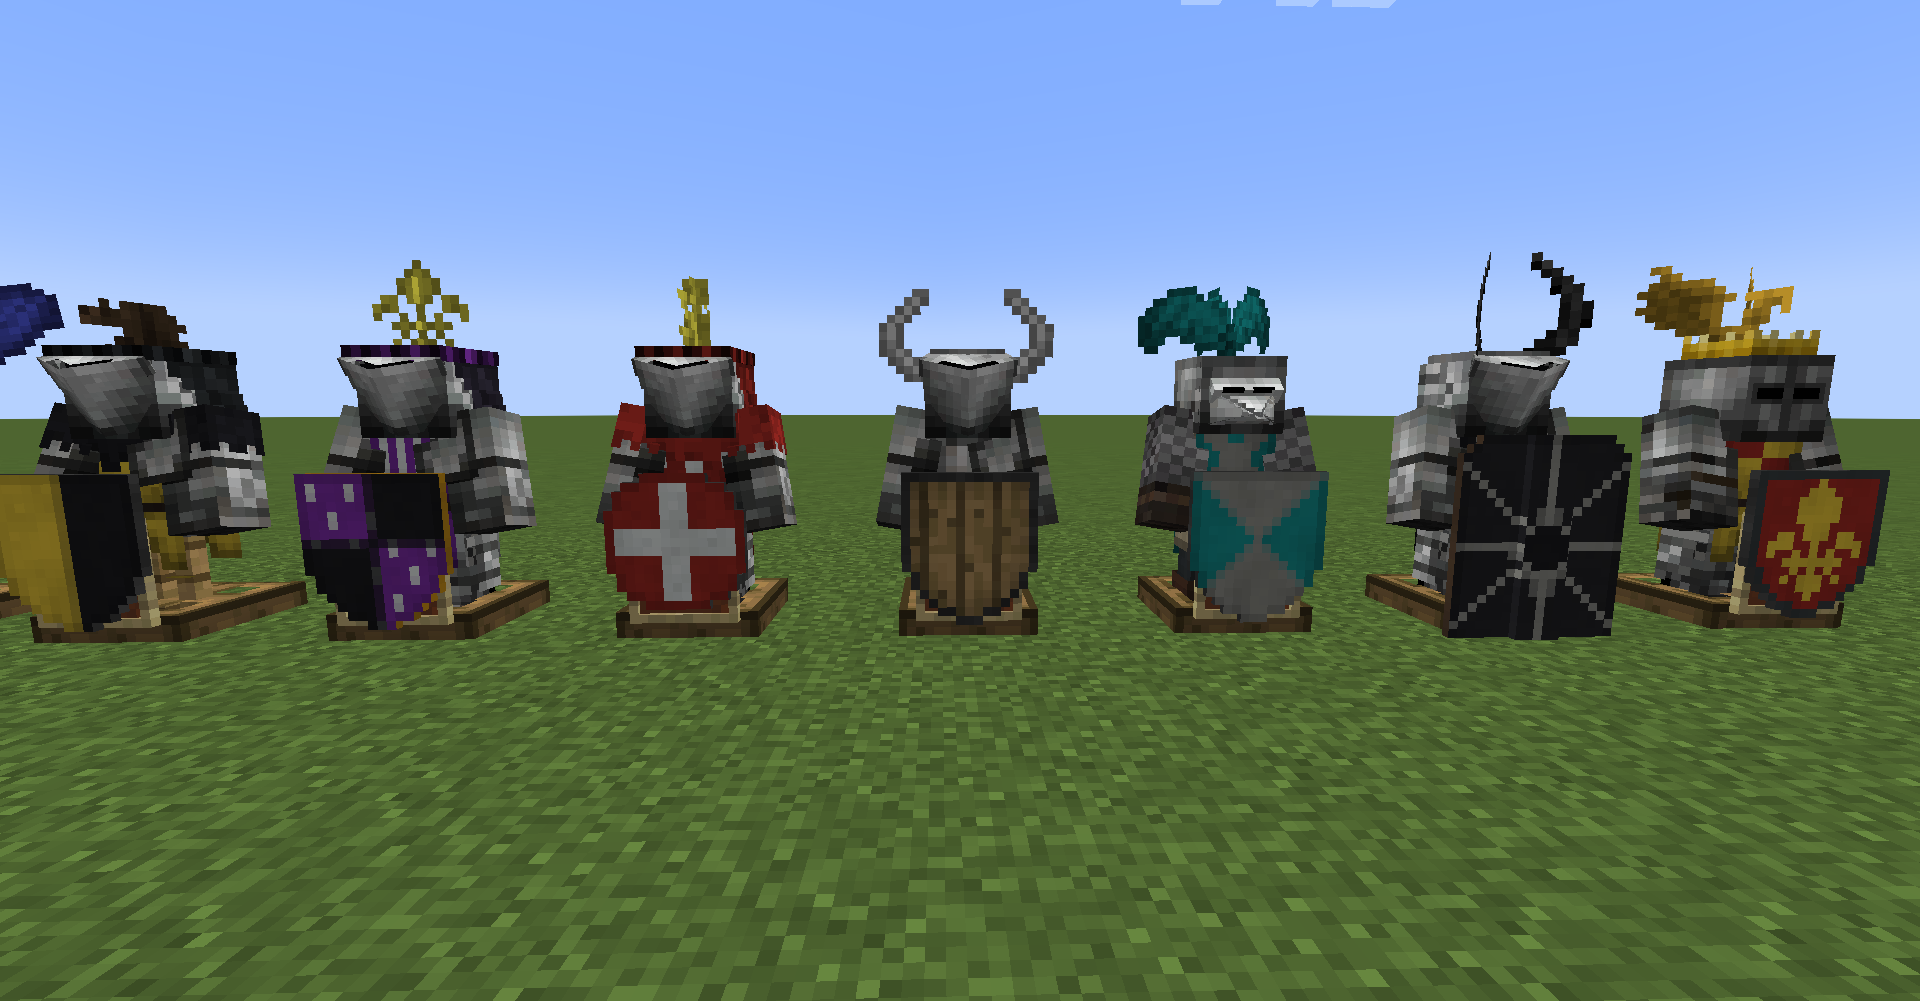 some other tips for decorating your armor